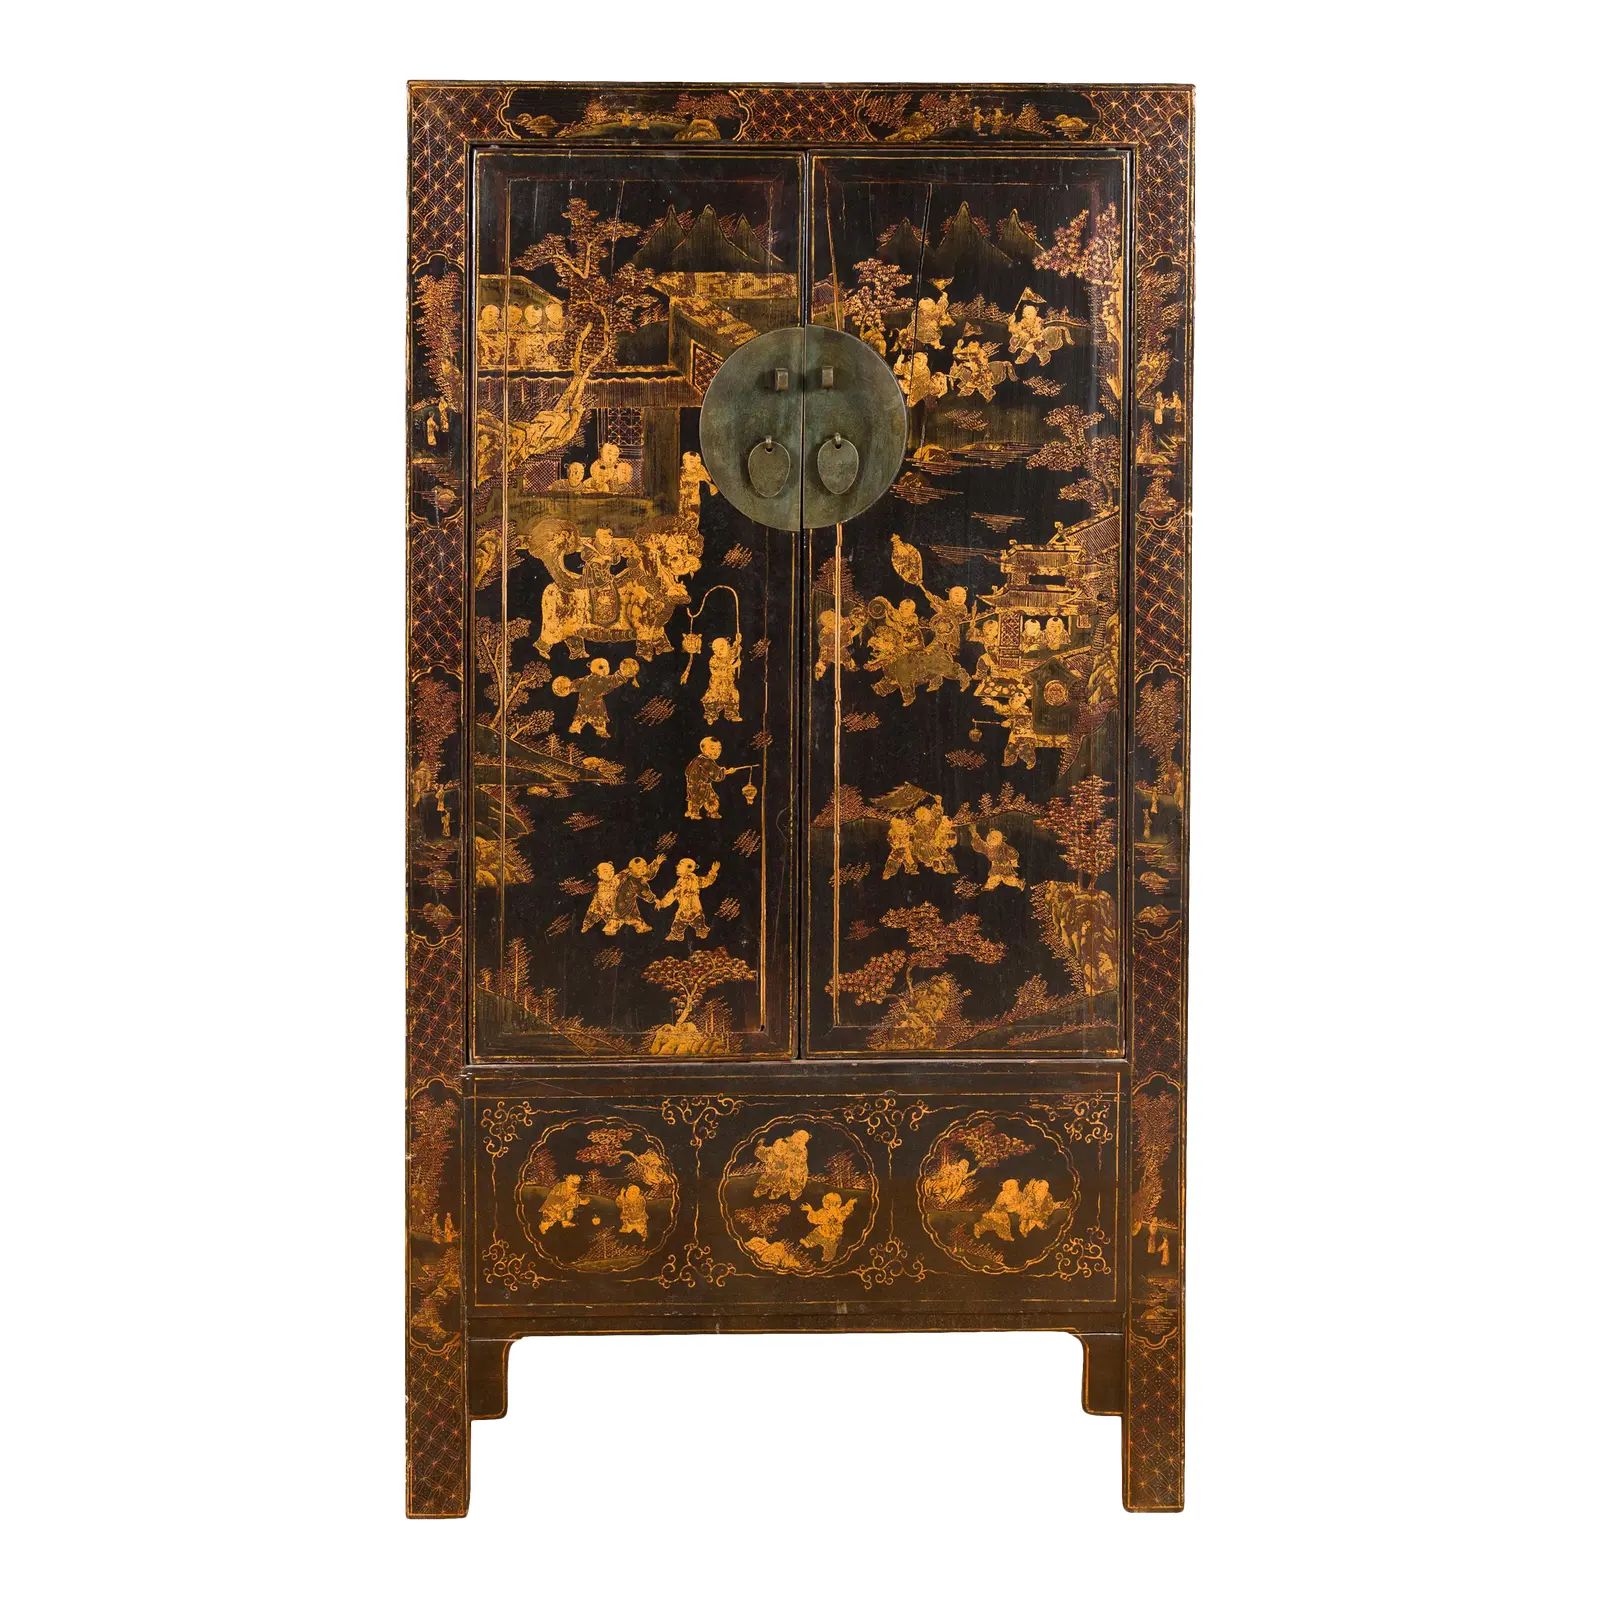 Chinese 19th Century Qing Dynasty Black and Gold Cabinet with Chinoiserie Decor | Chairish